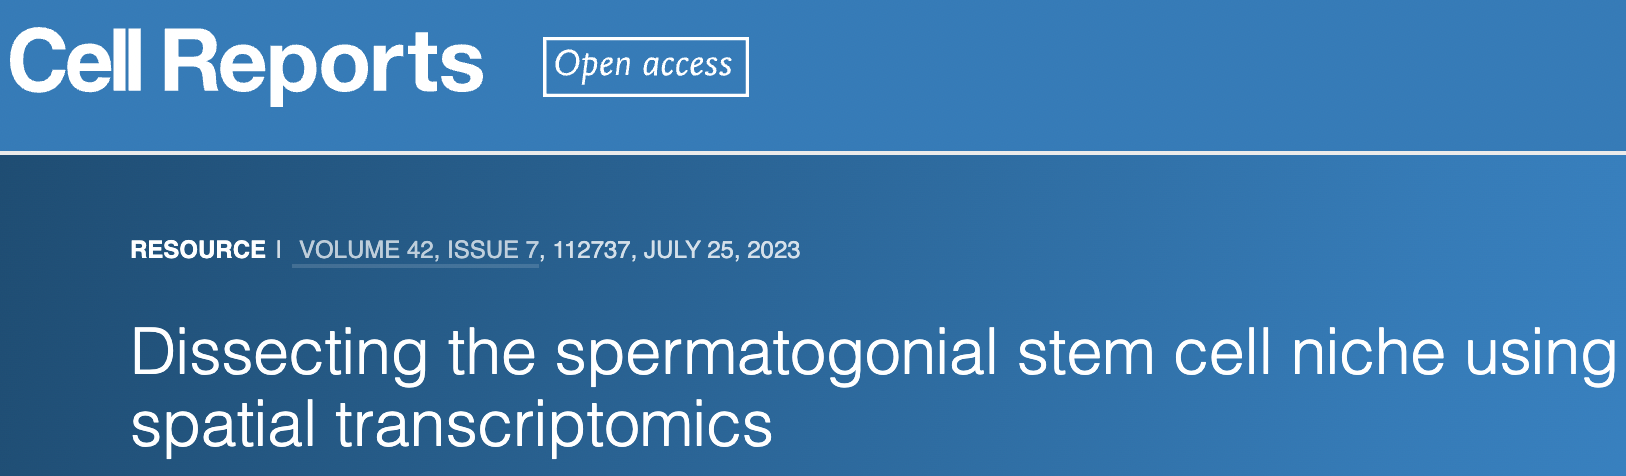 [July 2, 2023] Our research article on dissecting the spermatogonial stem cell niche using spatial transcriptomics is published!